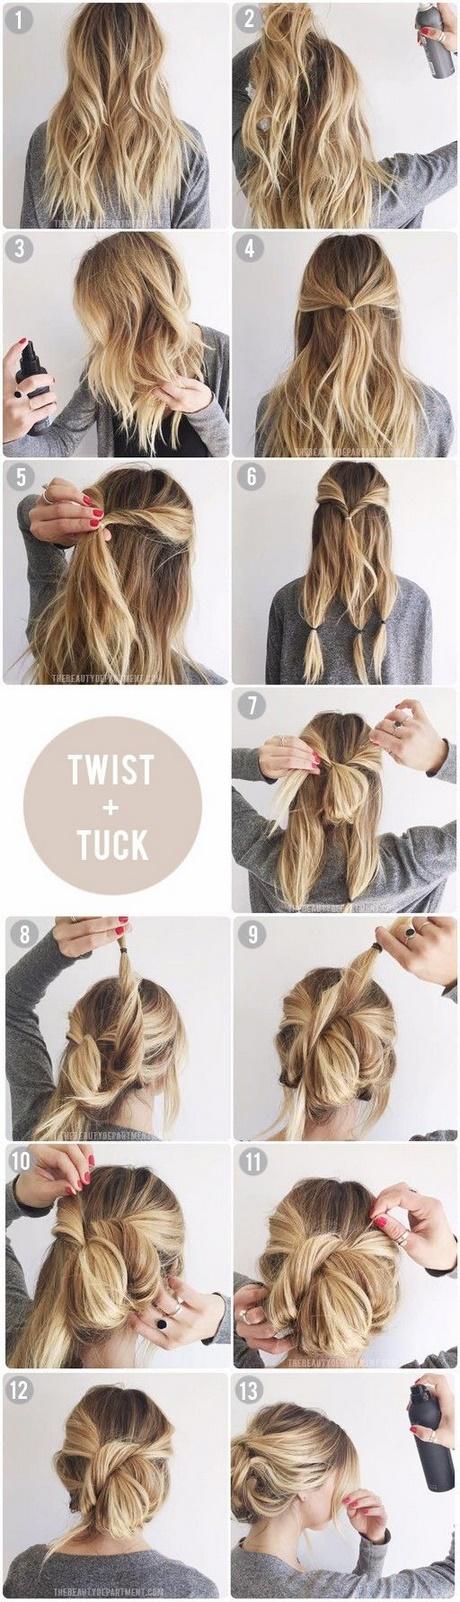 Easiest updos for long hair easiest-updos-for-long-hair-76_17